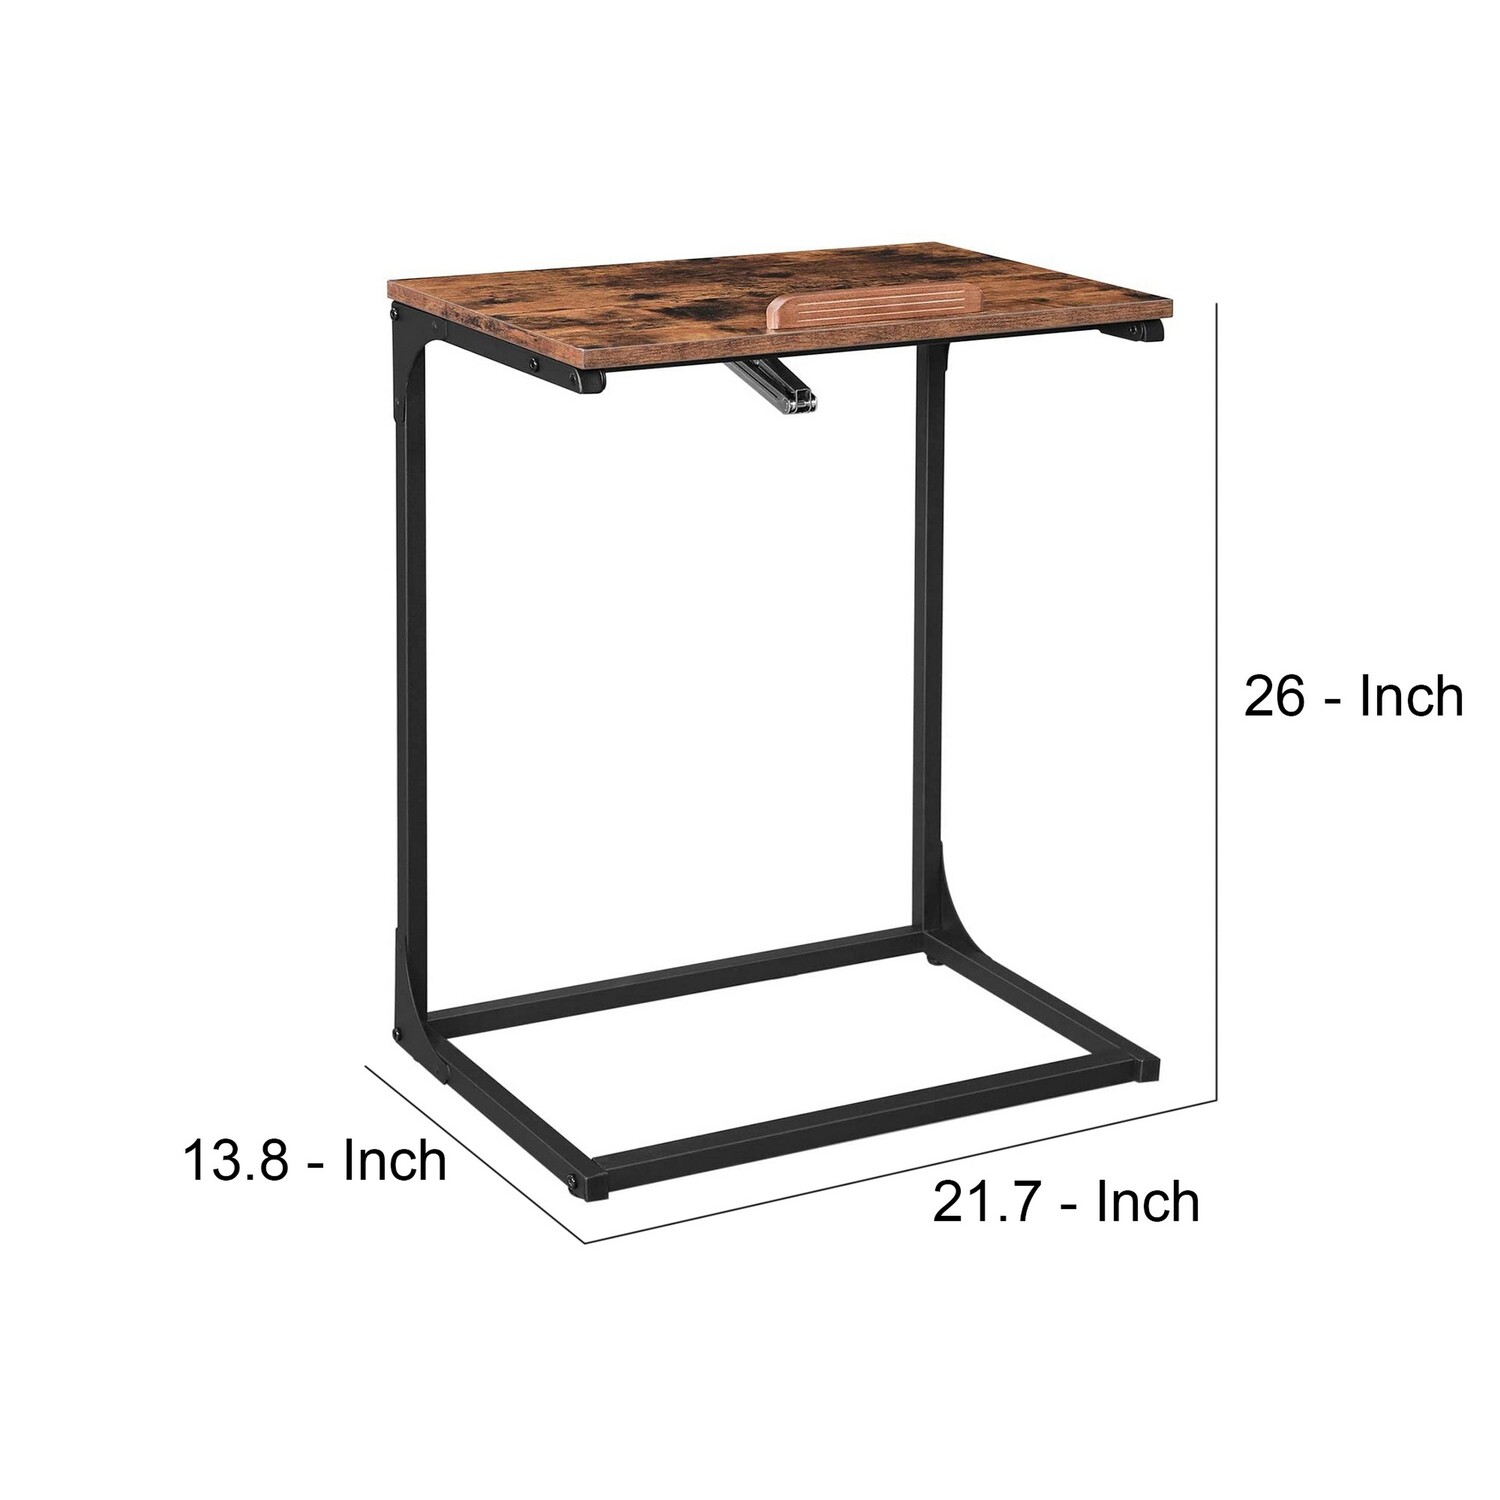 Metal Laptop Table with Tilting Wooden Top and Grains, Brown and Black - image 5 of 5